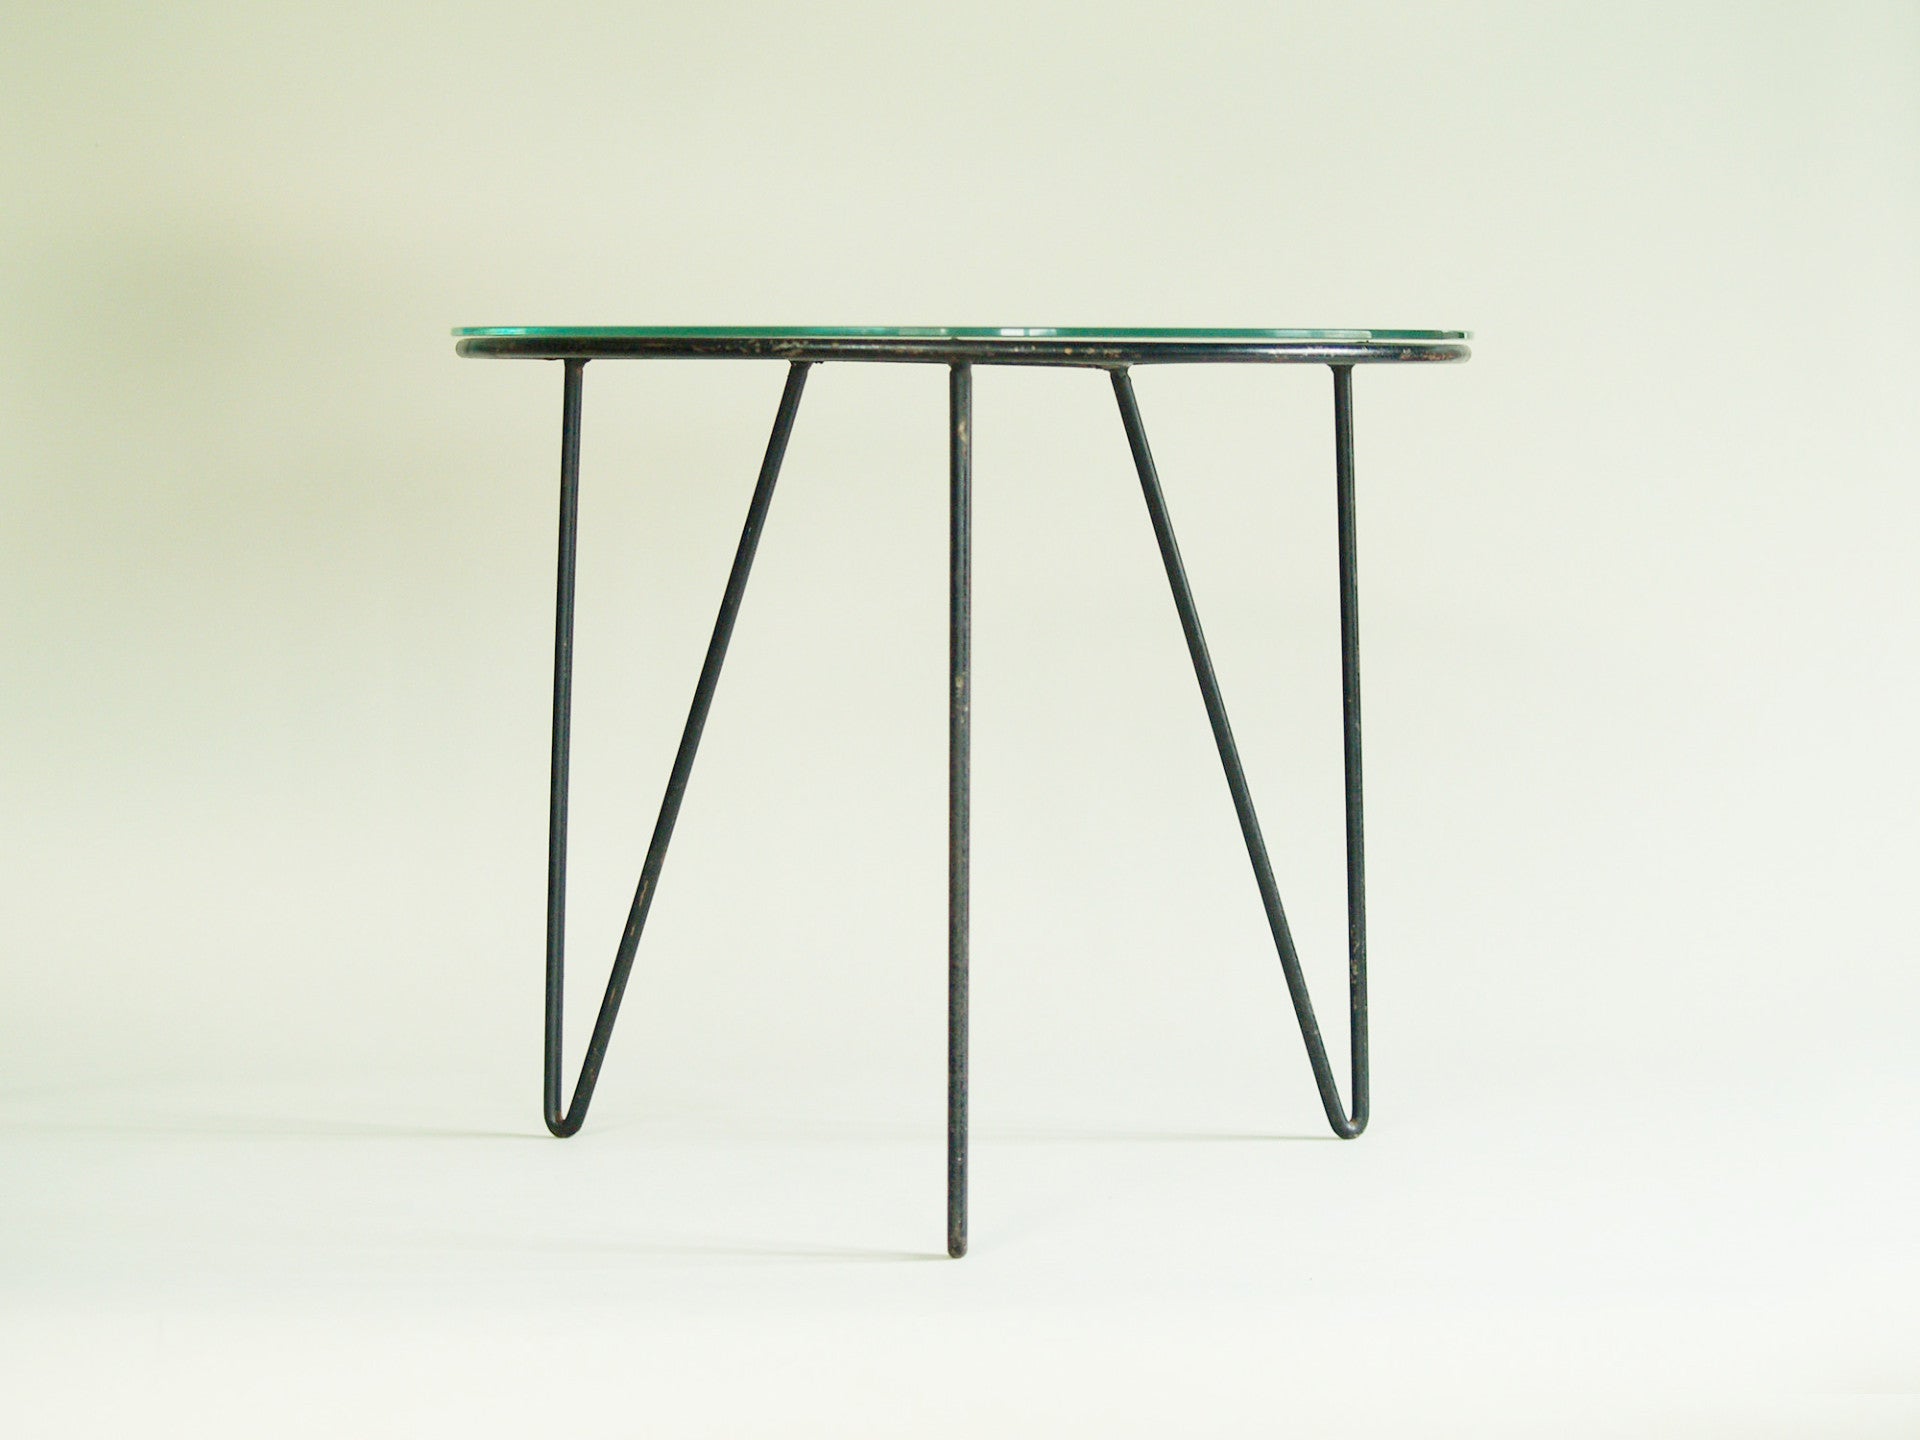 Guéridon / table basse moderniste, France (vers 1953)..Modernist occasional coffee table, France (circa 1953)